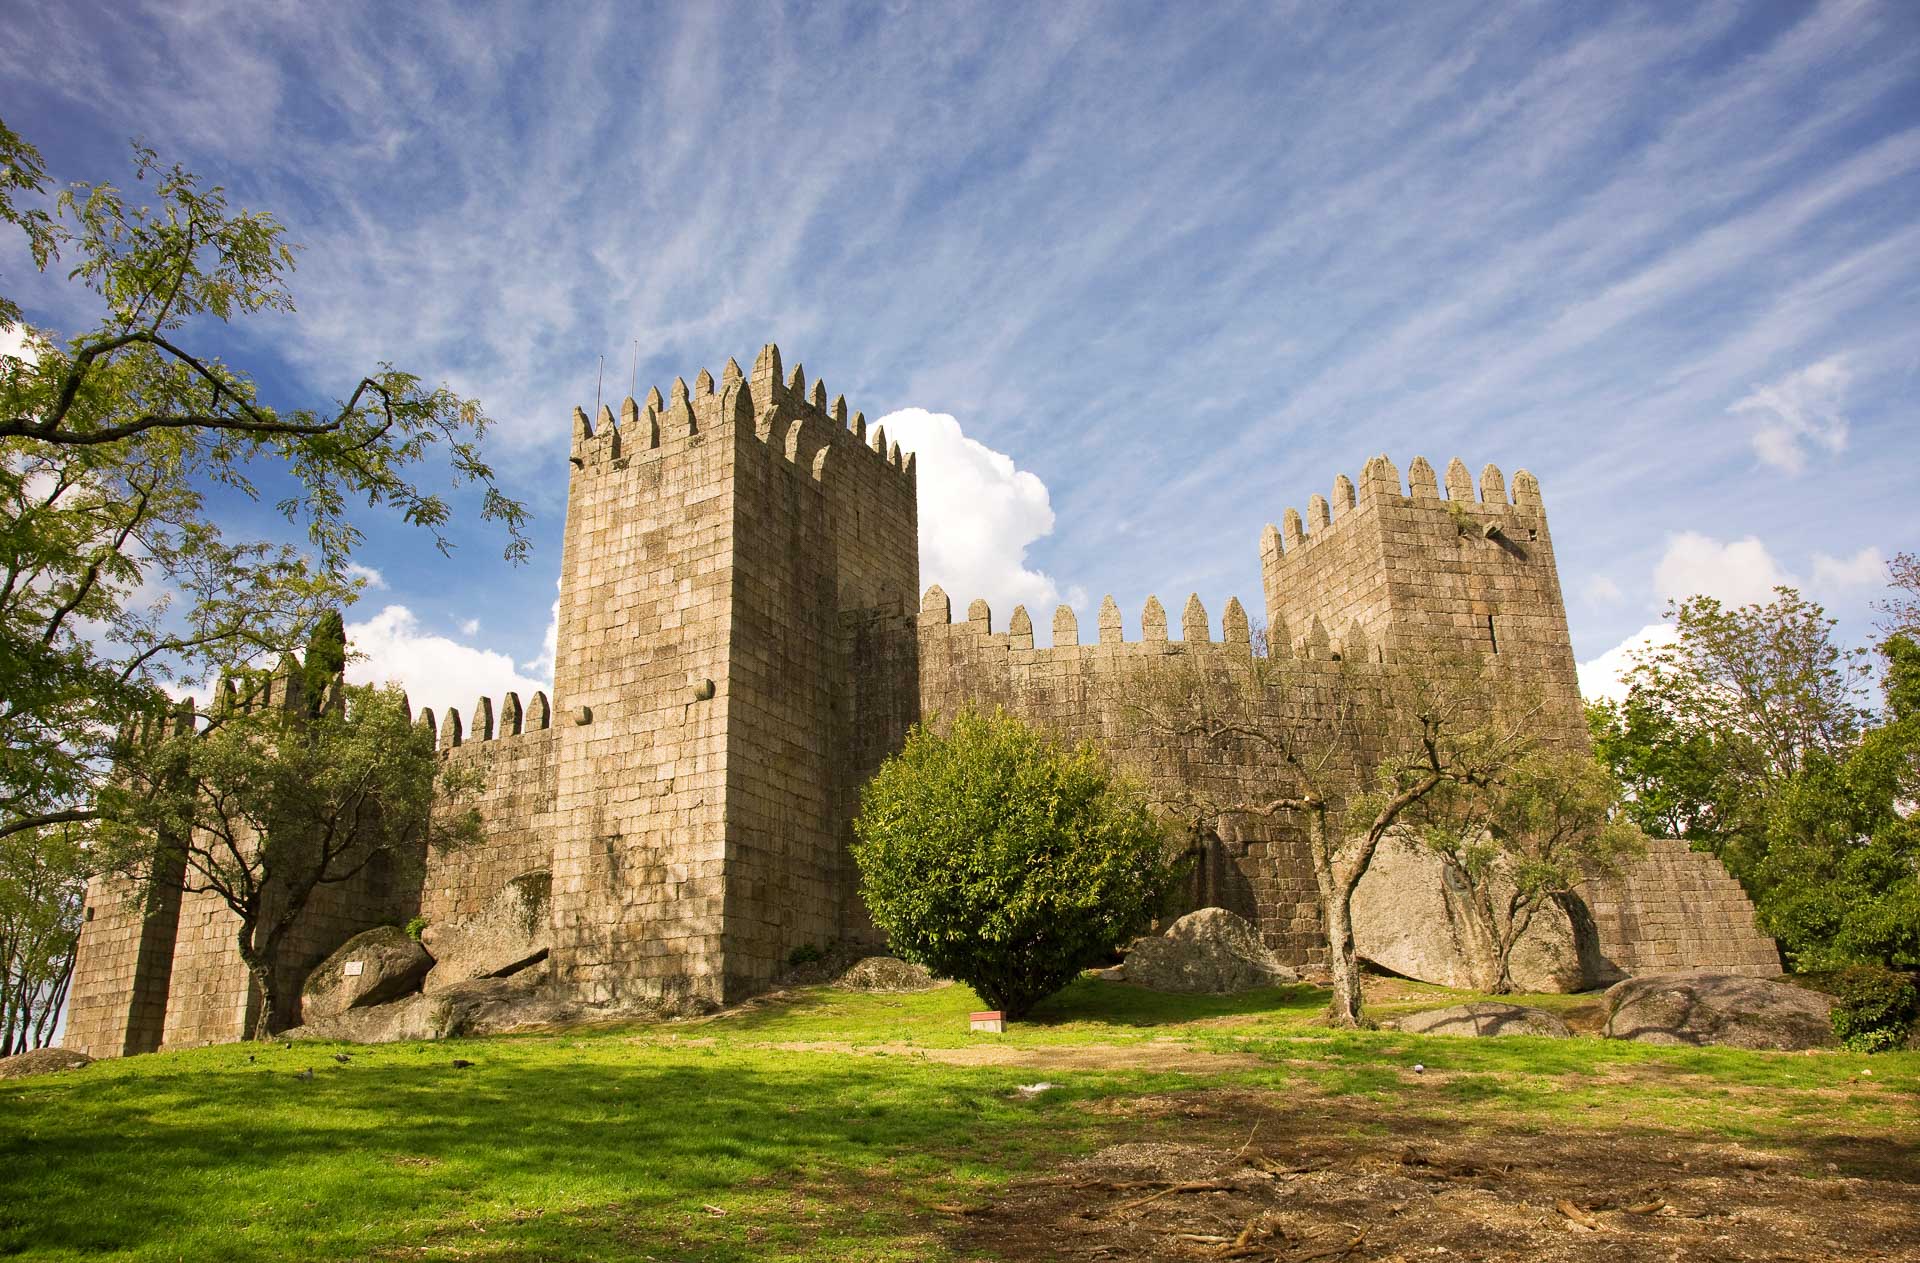 Solares of Portugal Culture, Heritage & History